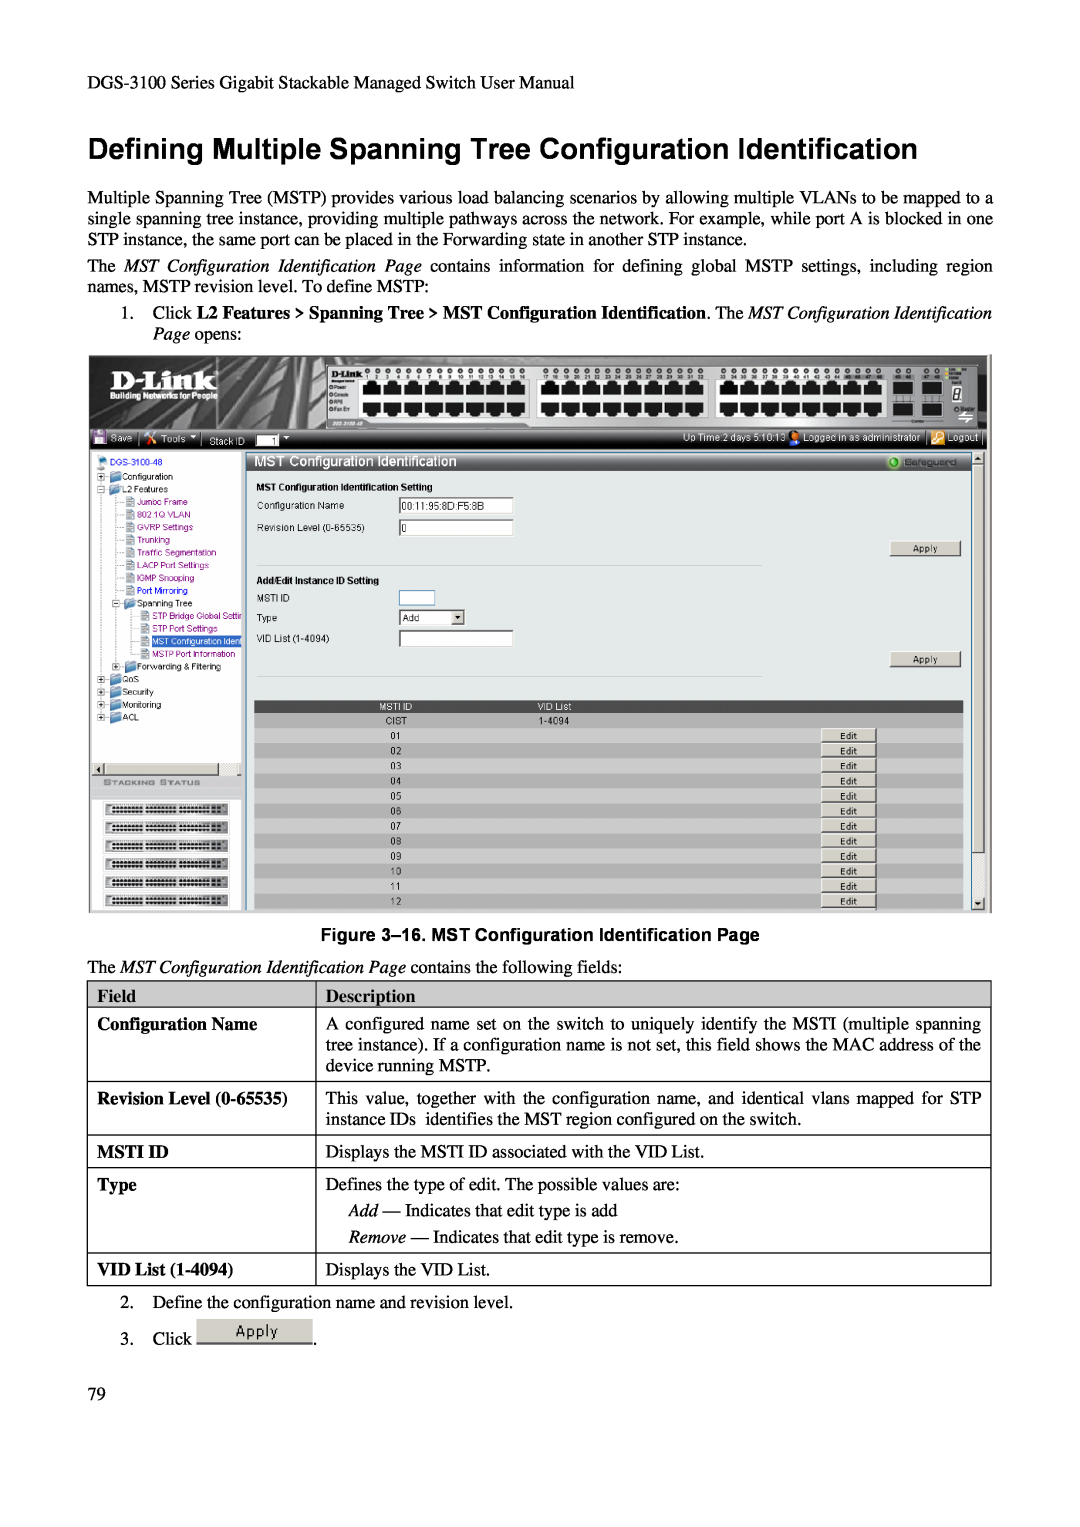 D-Link DGS-3100 Defining Multiple Spanning Tree Configuration Identification, 16. MST Configuration Identification Page 